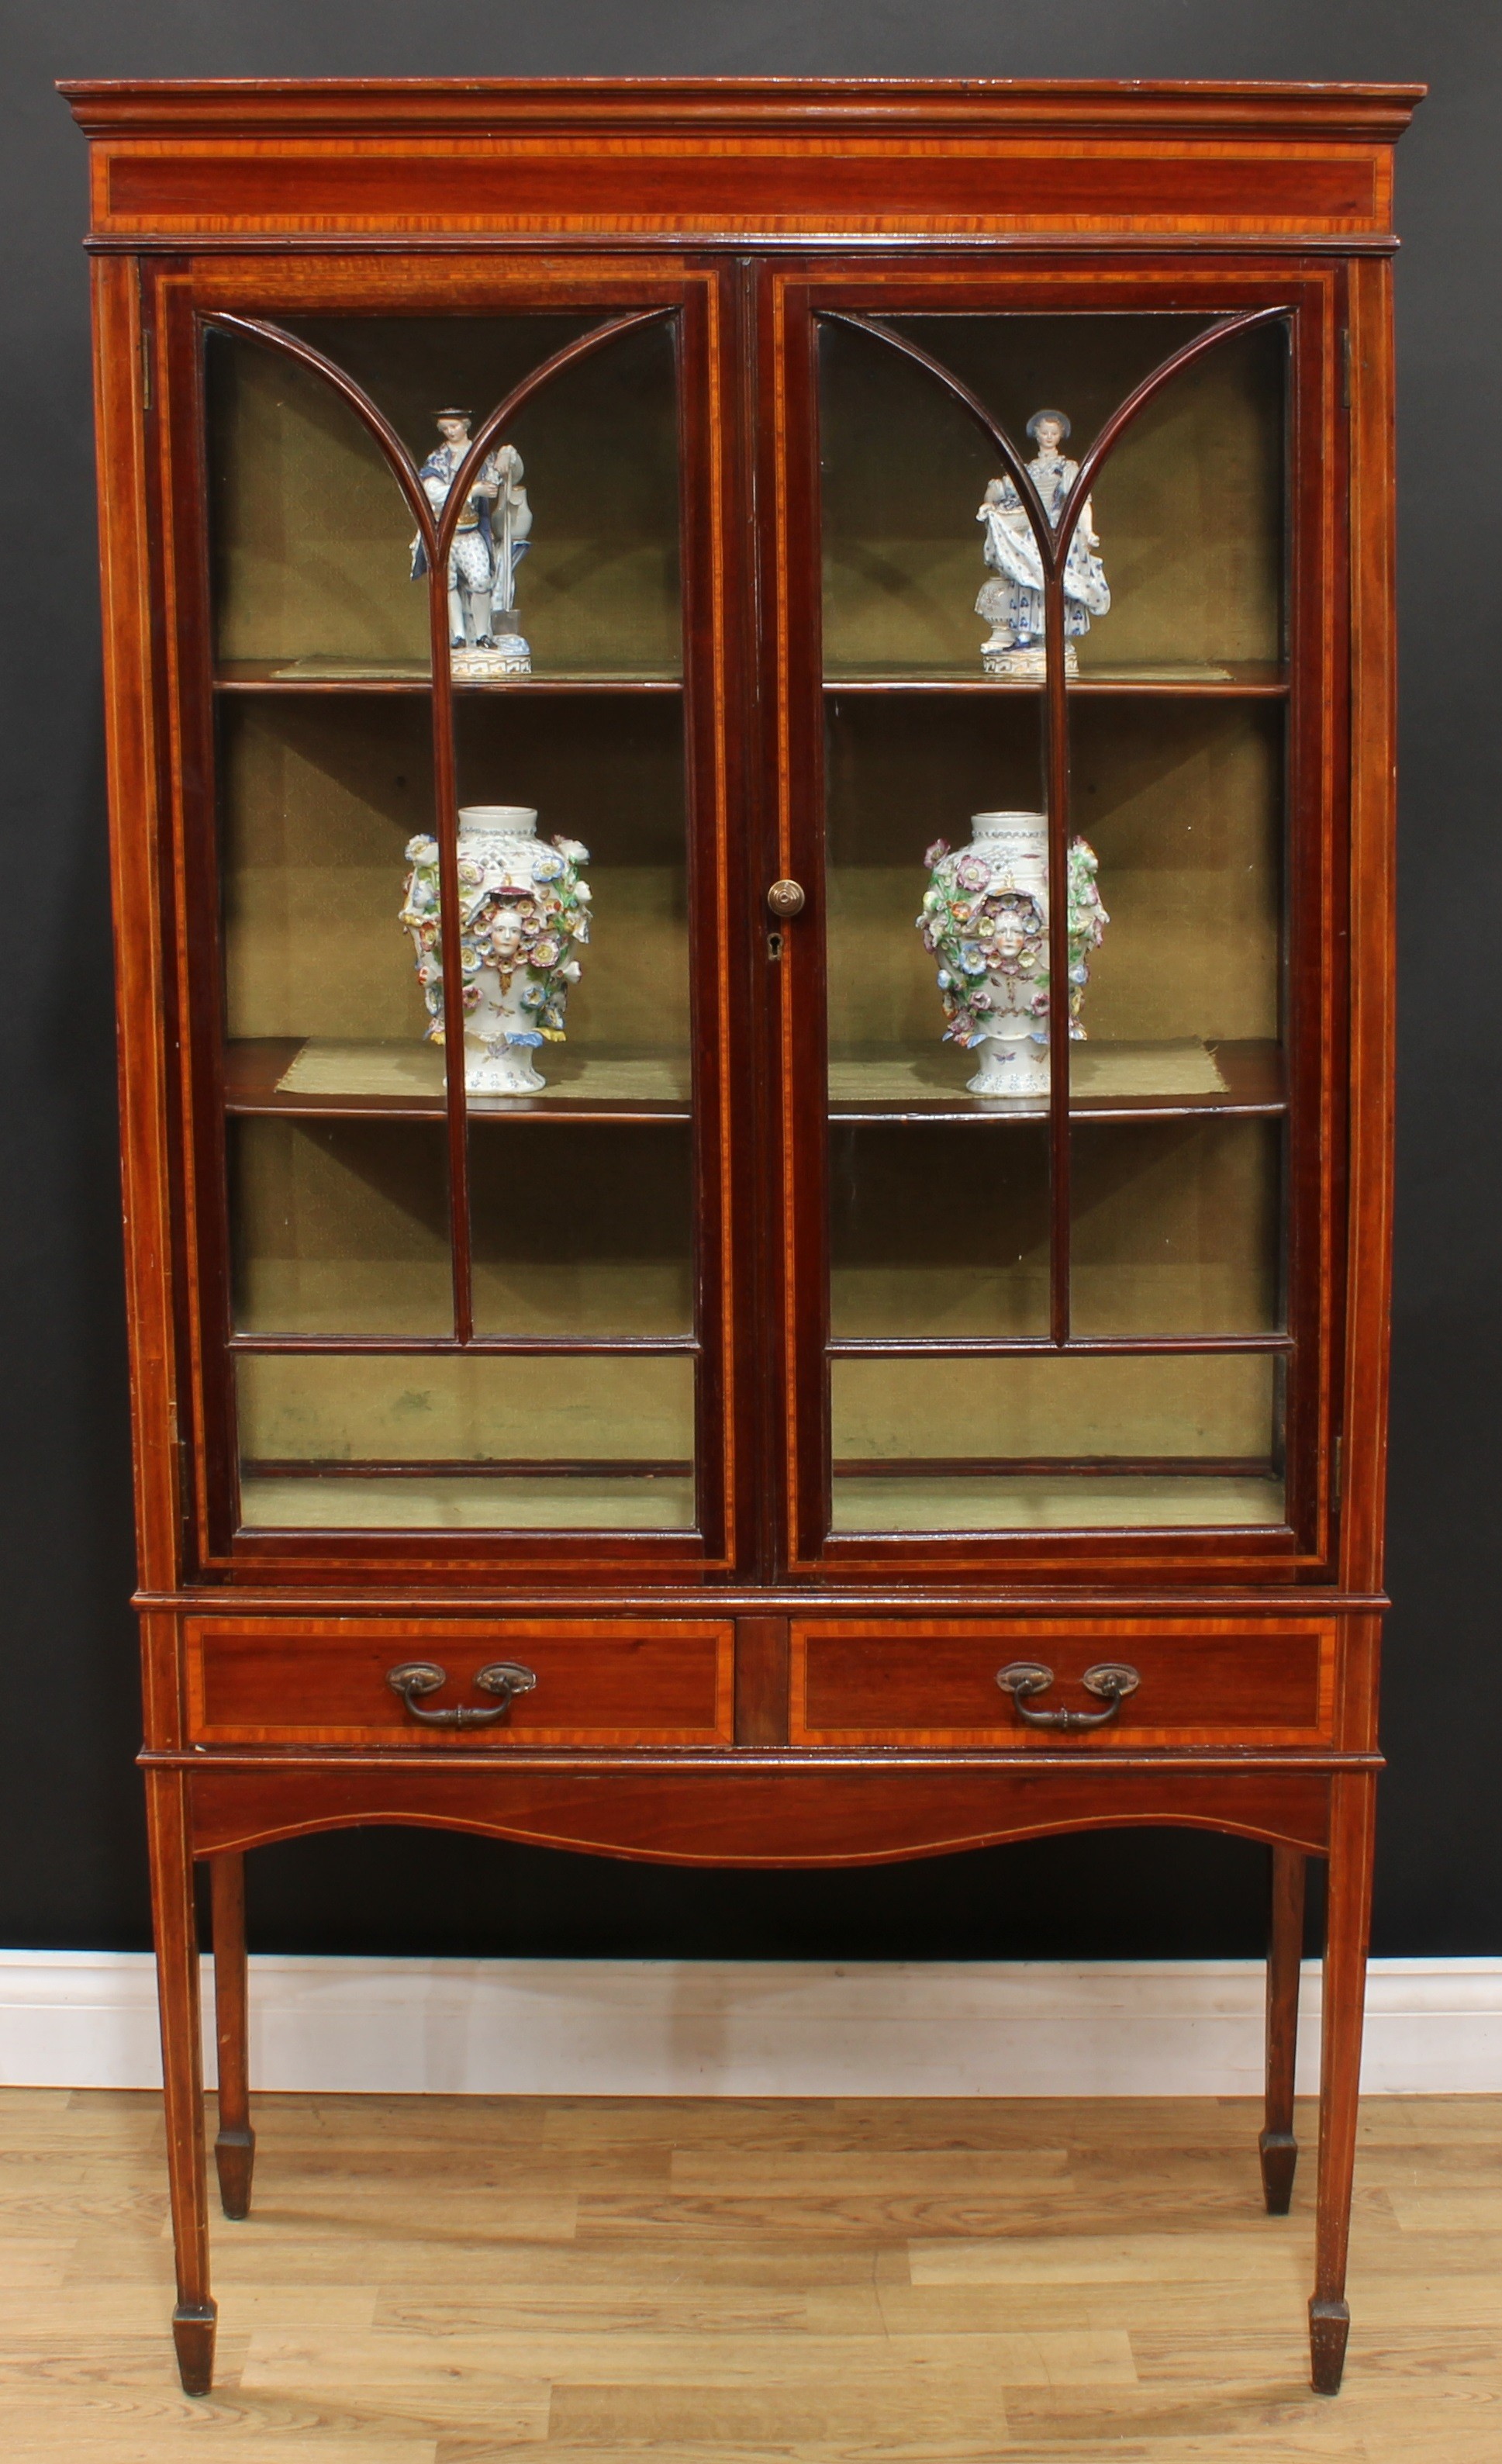 An Edwardian satinwood crossbanded mahogany display cabinet, moulded cornice above a pair of